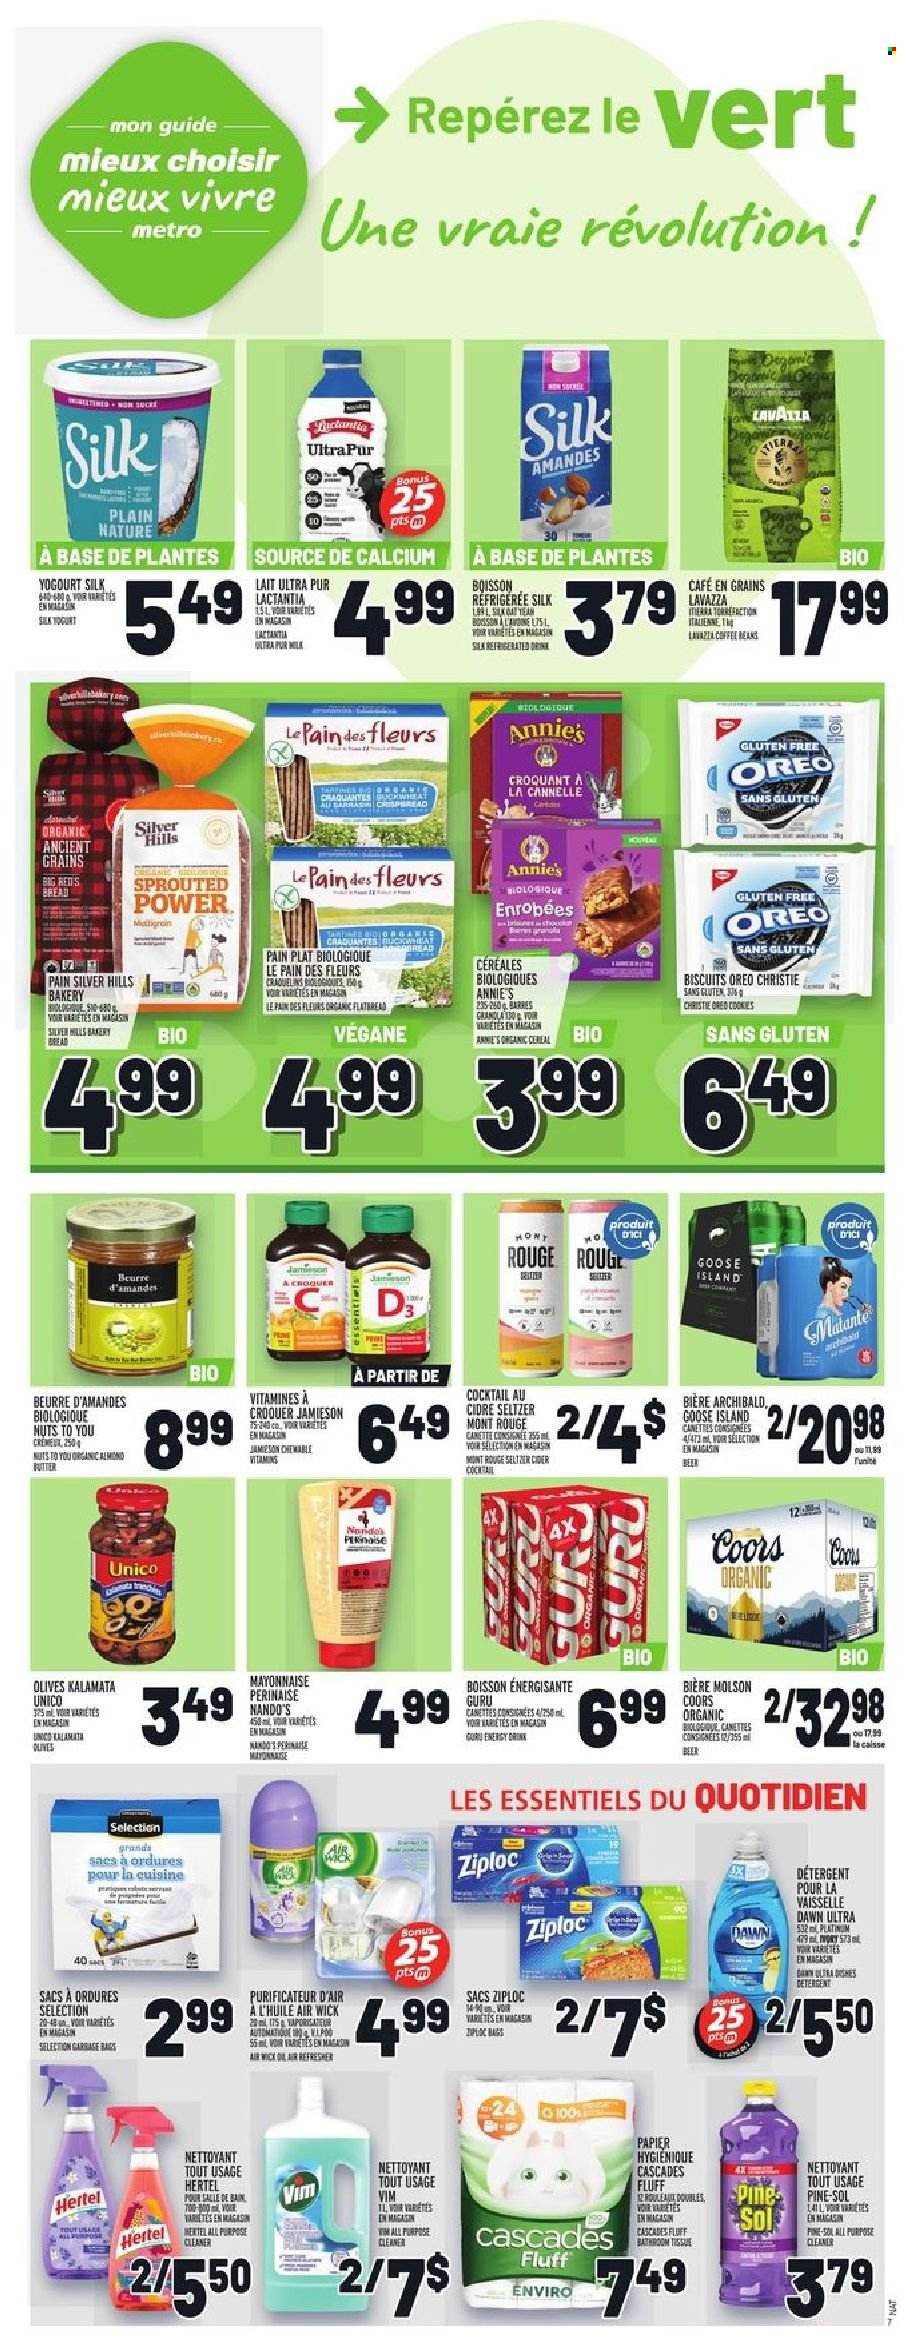 thumbnail - Metro Flyer - October 14, 2021 - October 20, 2021 - Sales products - bread, Annie's, milk, Silk, mayonnaise, cookies, biscuit, energy drink, seltzer water, coffee beans, Lavazza, Jameson, cider, beer, bath tissue, cleaner, Pine-Sol, bag, Ziploc, rags, Air Wick, Hill's, Oreo, calcium, detergent, olives, Coors. Page 8.